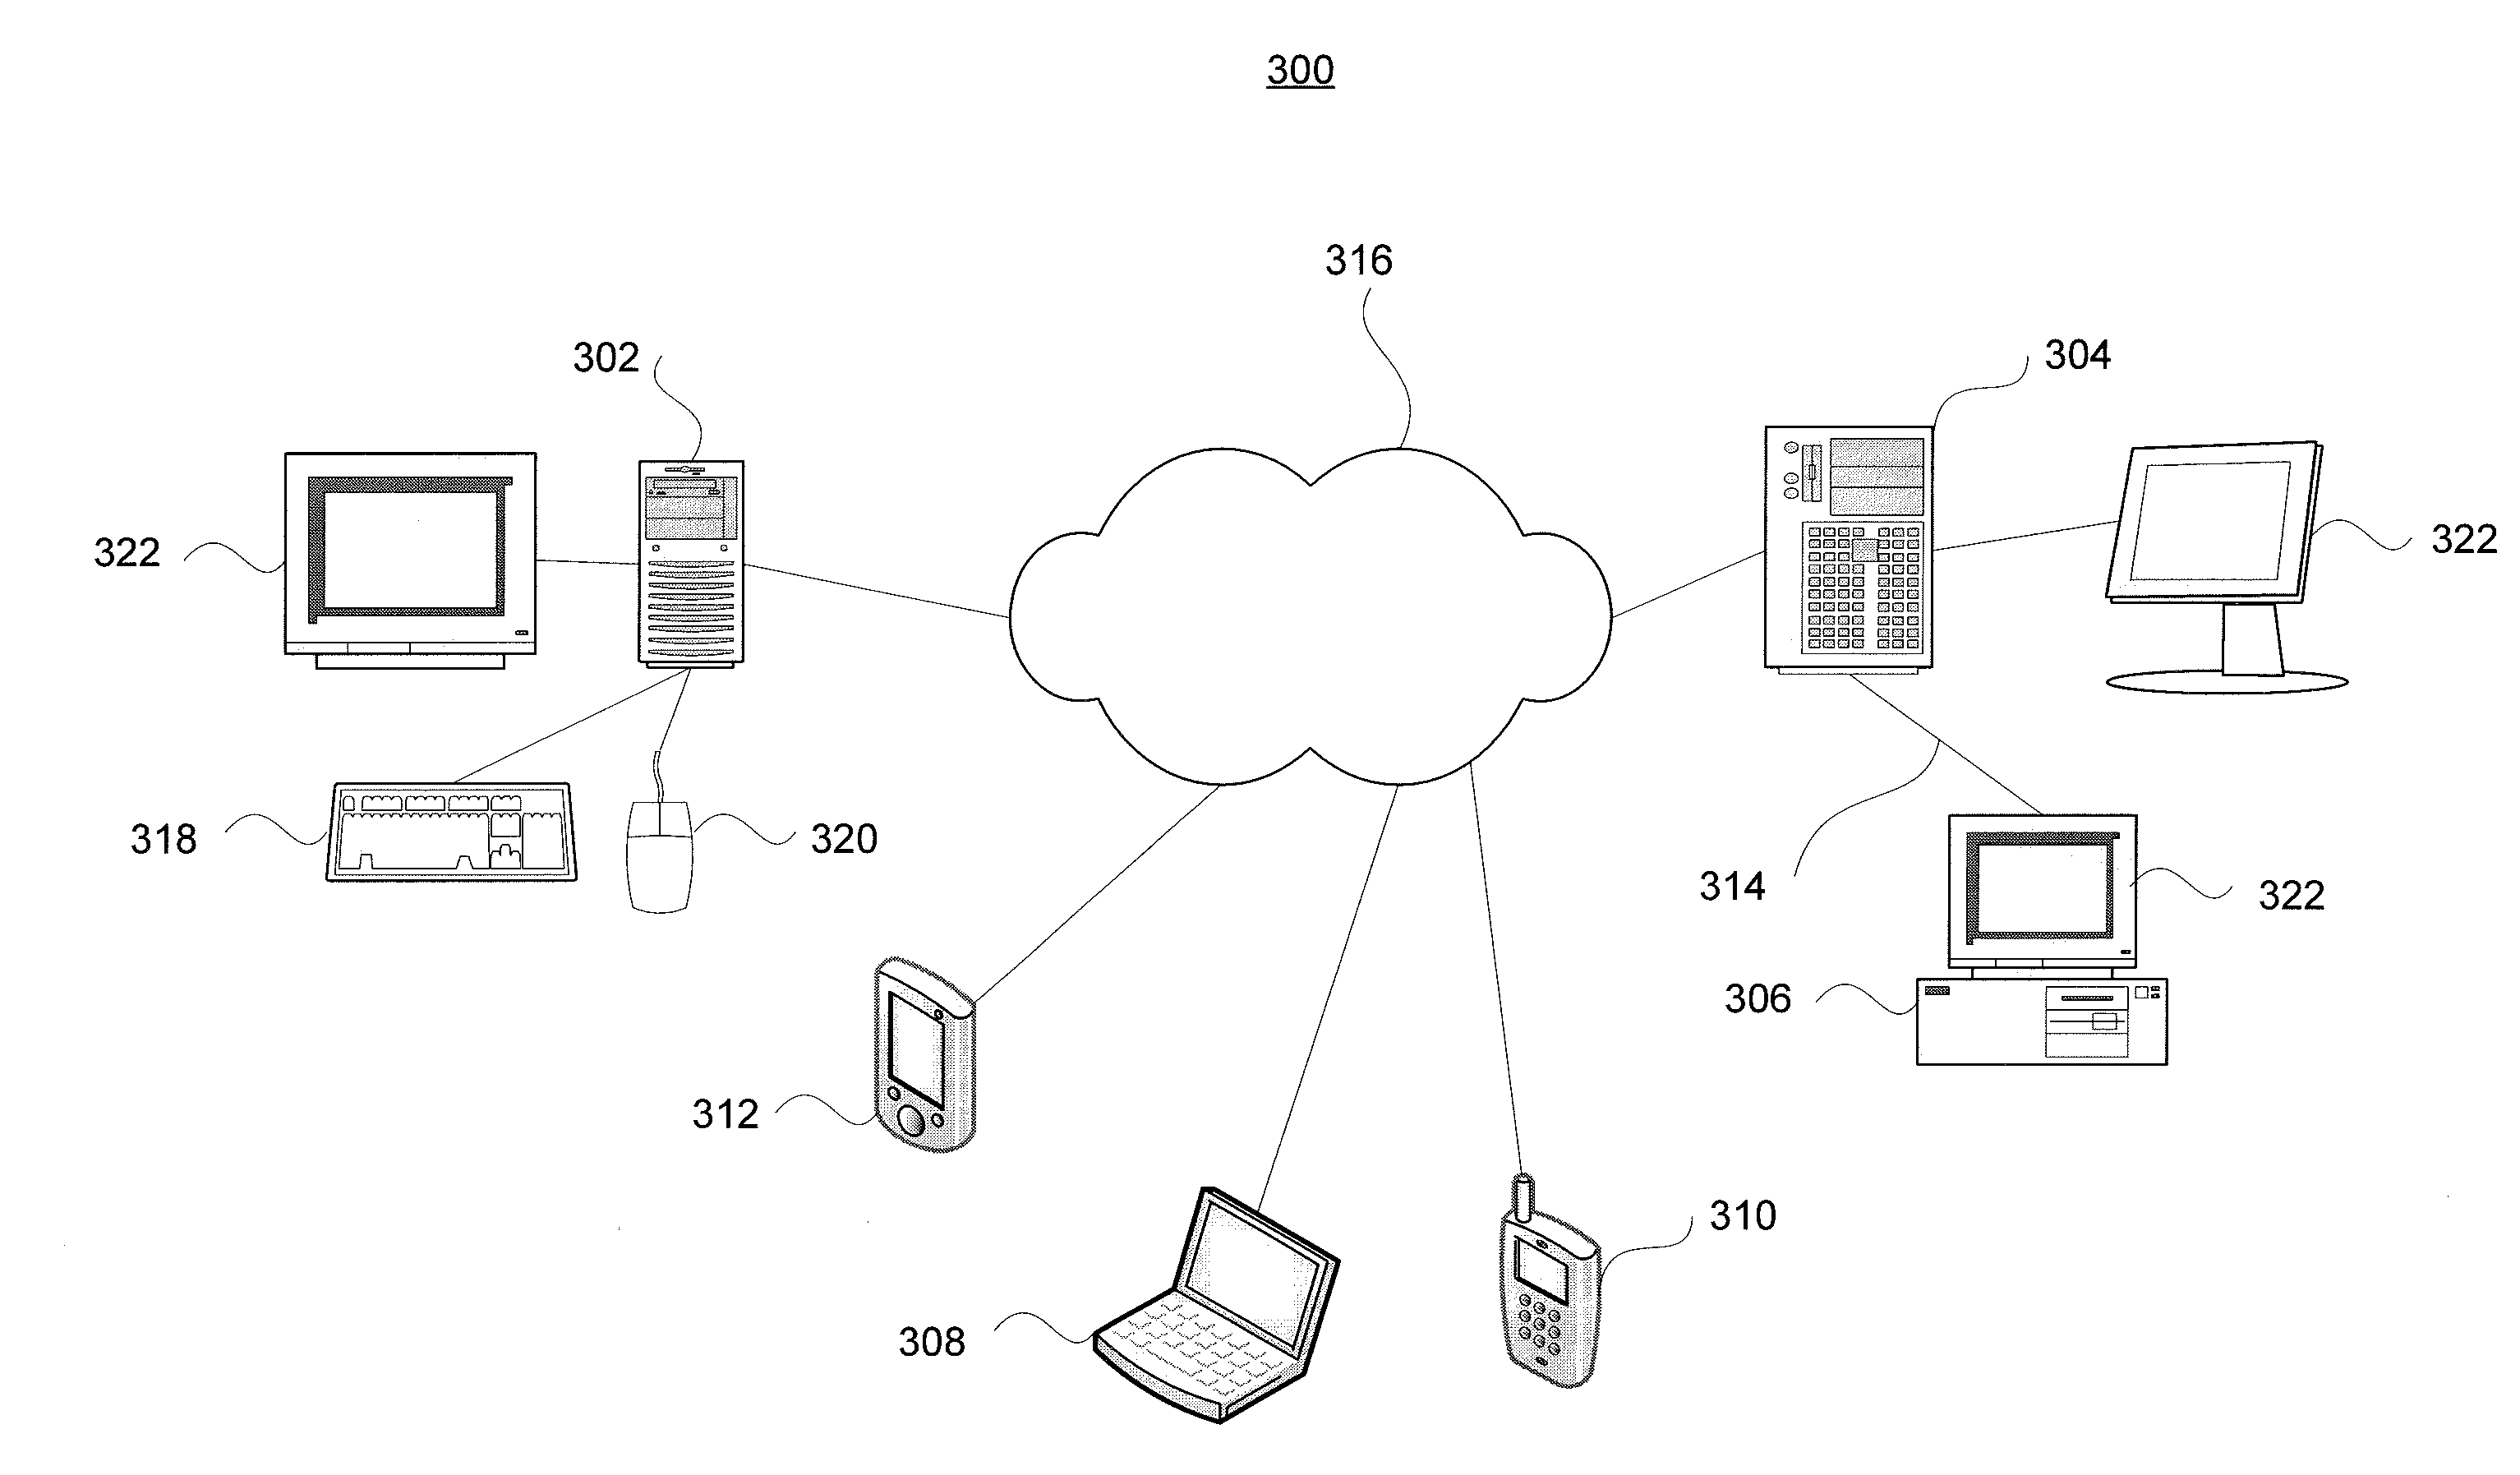 System to share network bandwidth  among competing applications